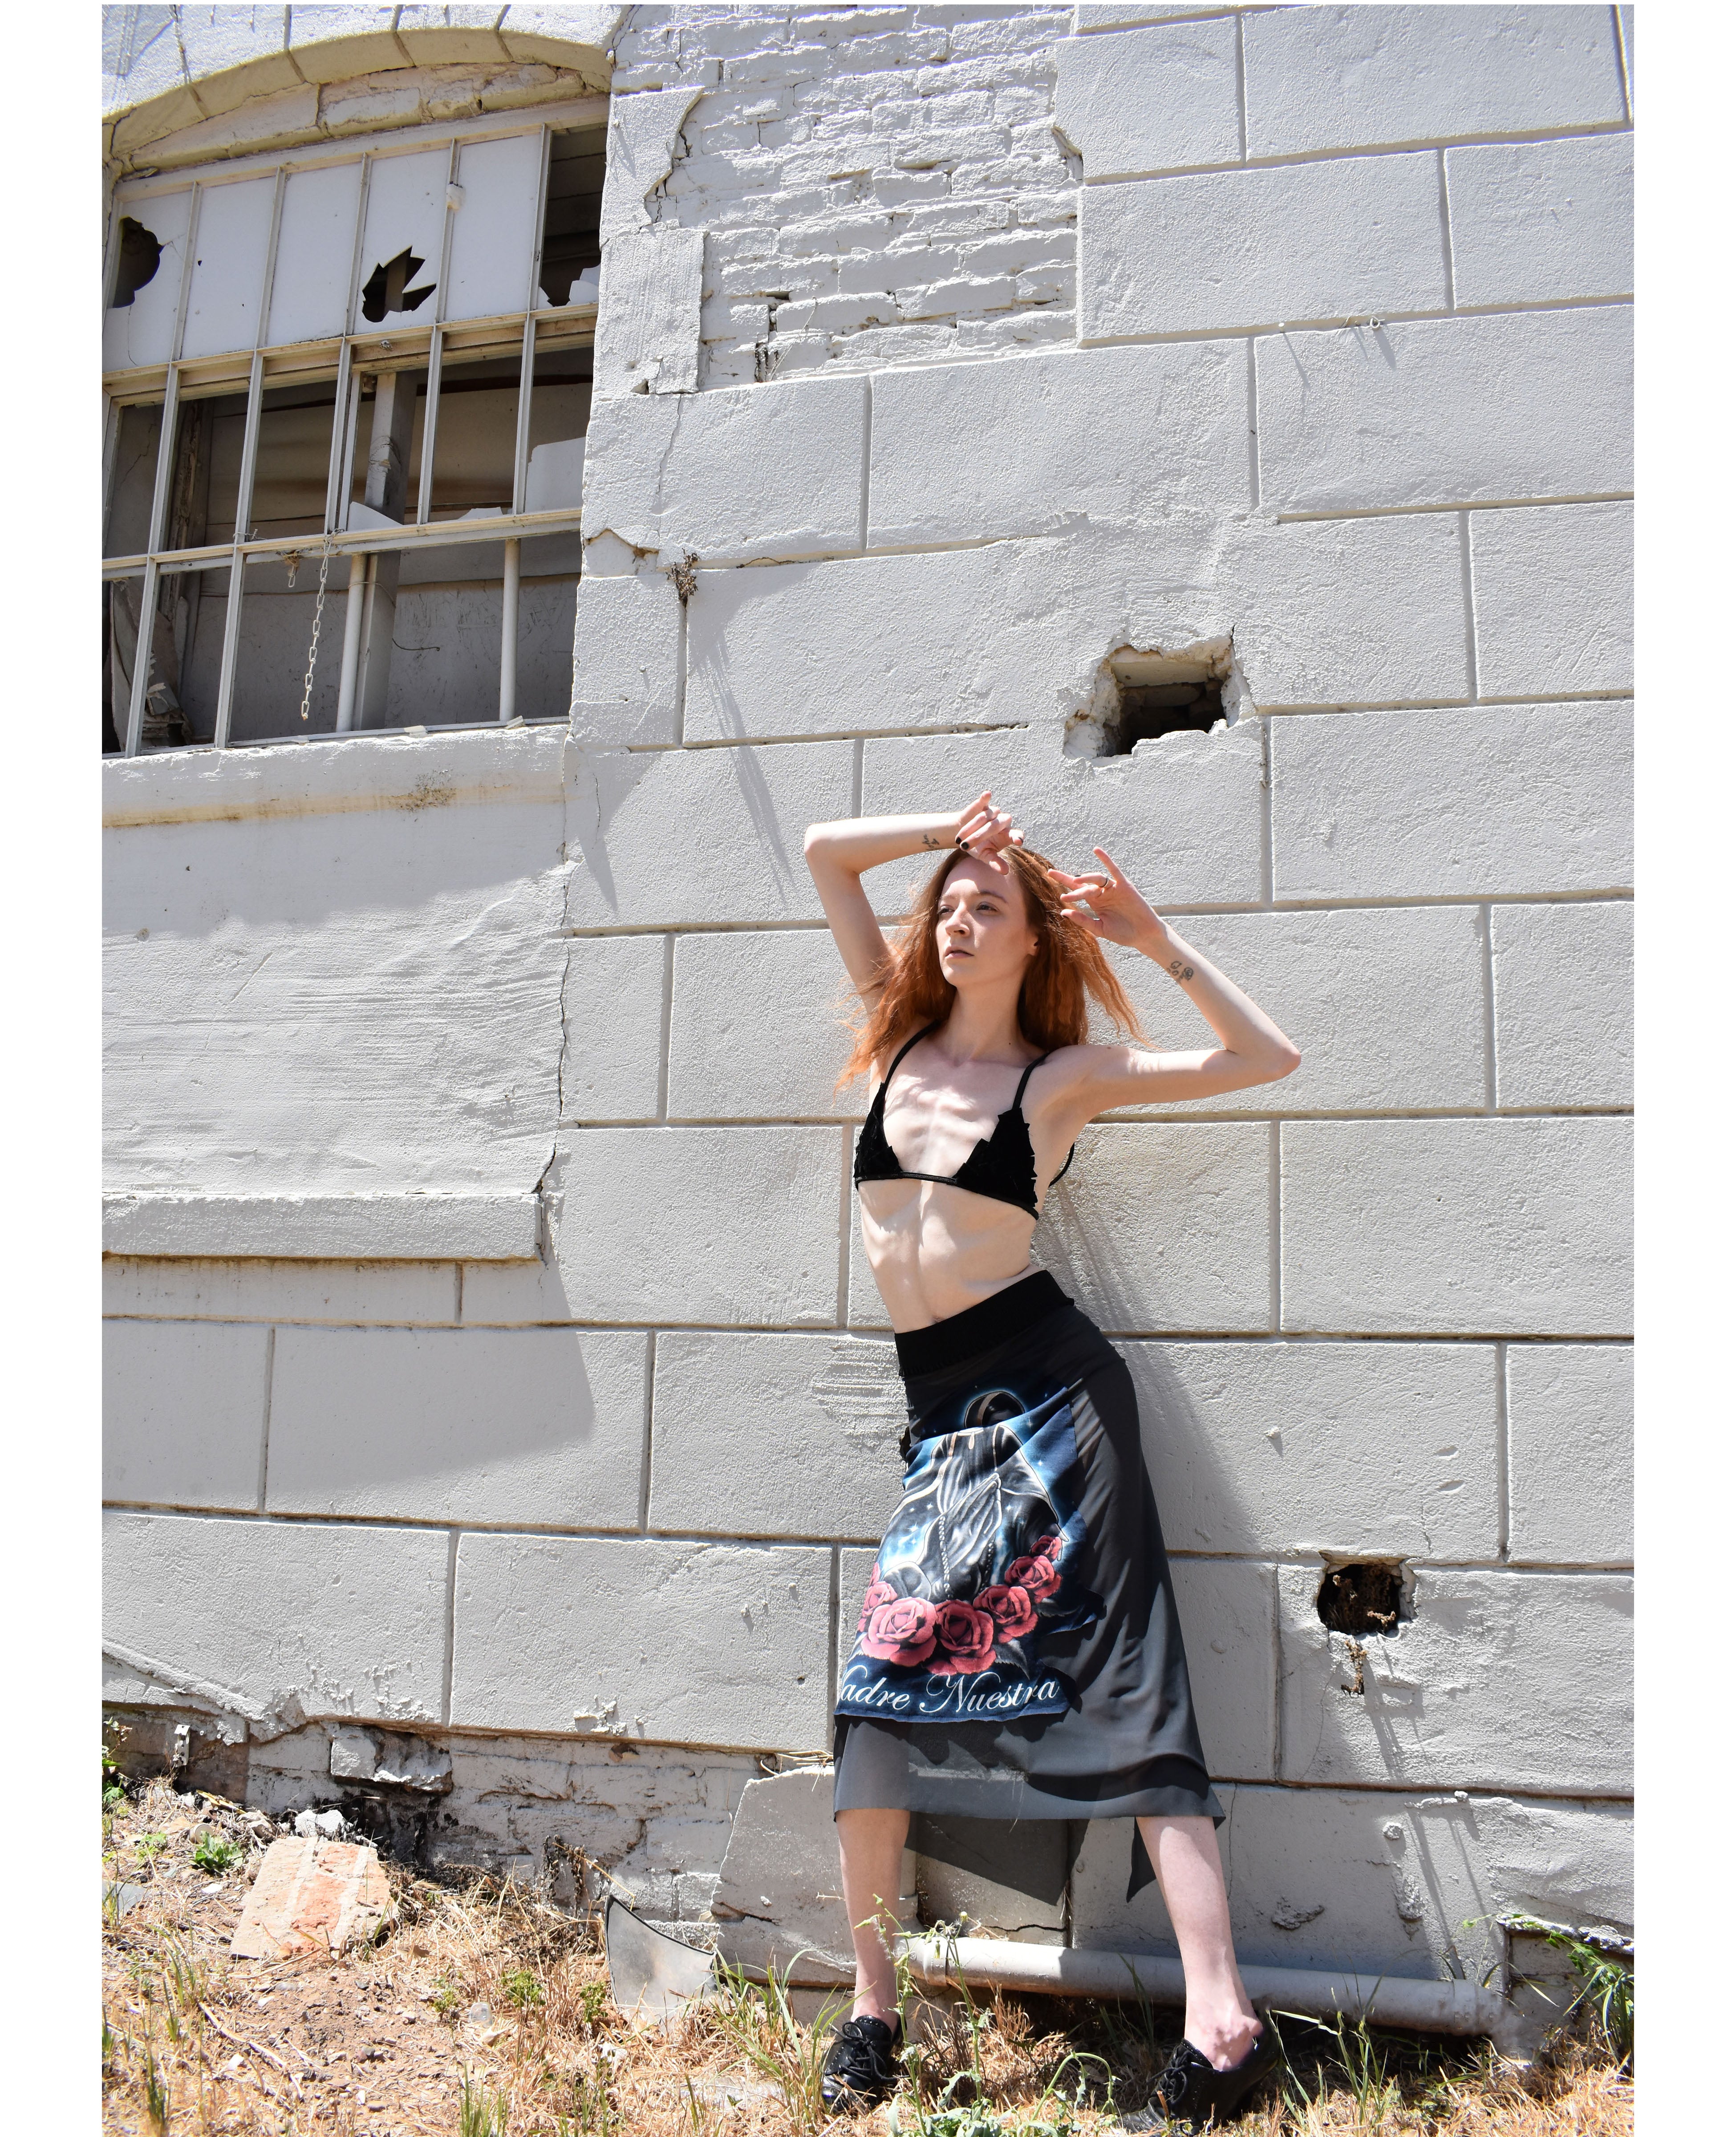 Sheer Upcycled Madre Nuestra T-shirt Skirt